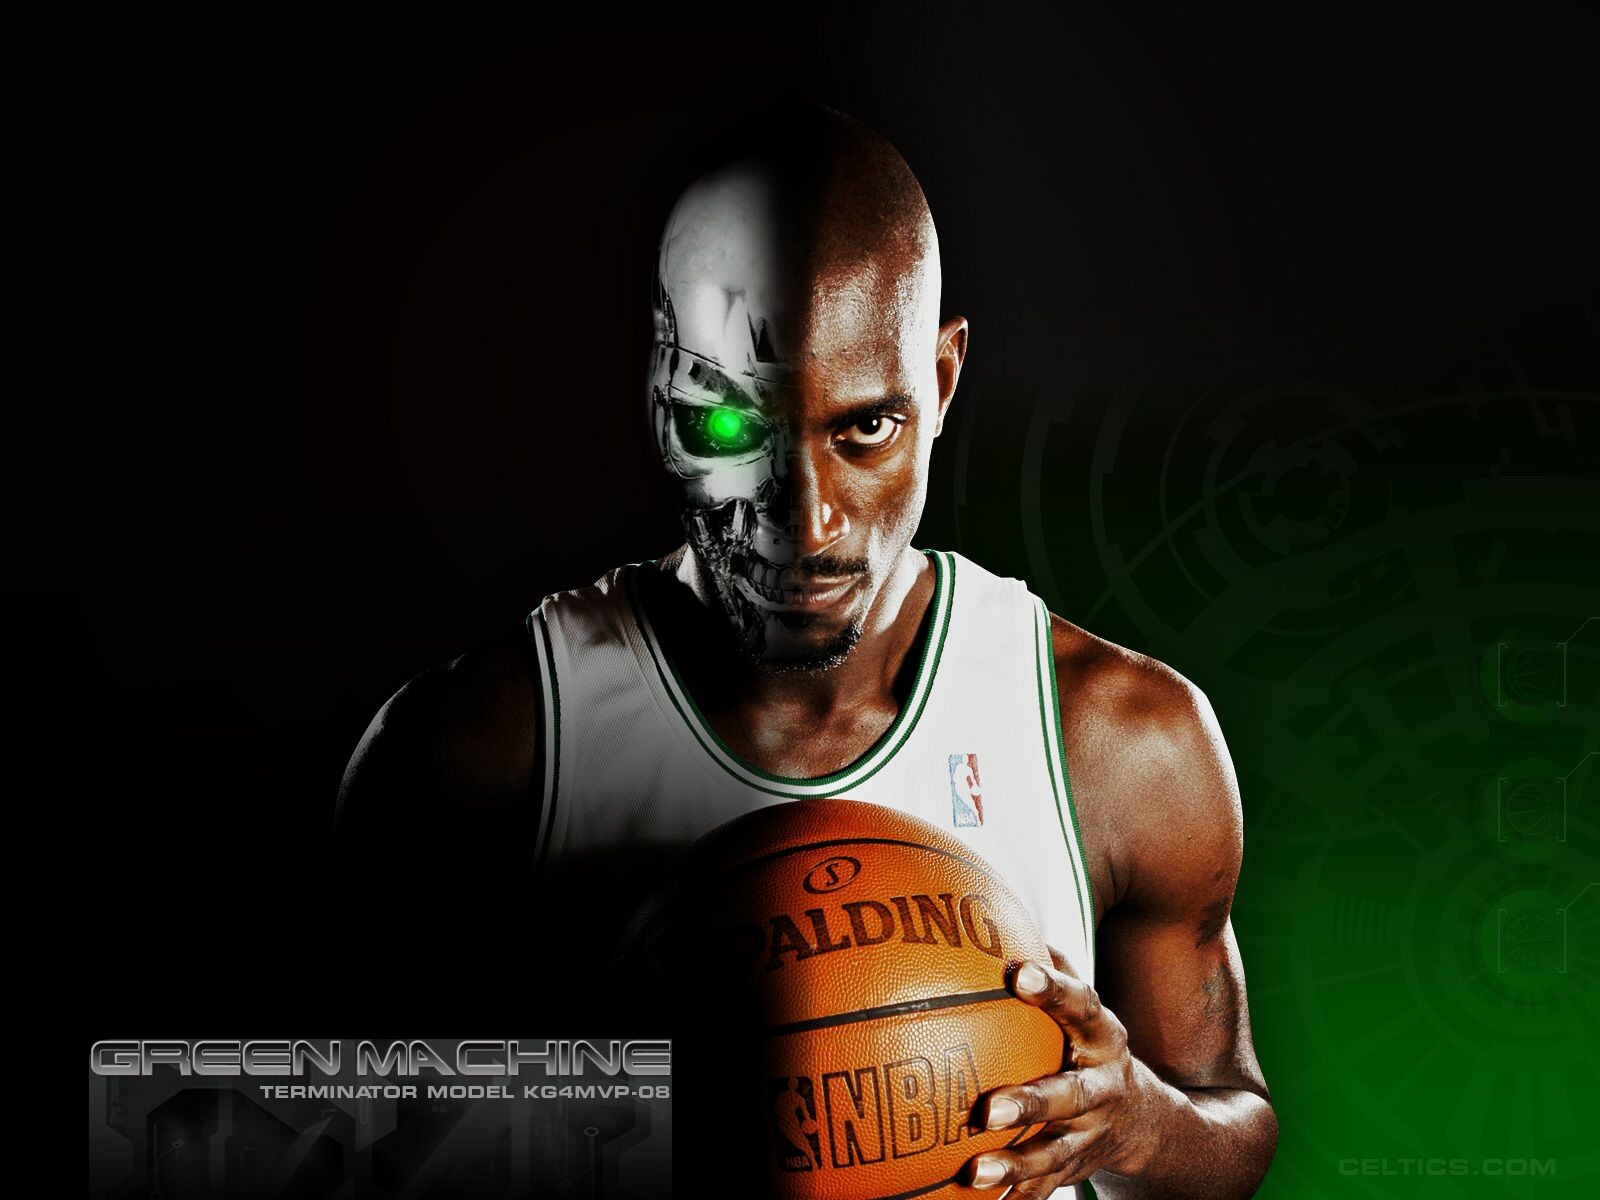 56+ NBA Wallpapers: HD, 4K, 5K for PC and Mobile | Download free images for  iPhone, Android